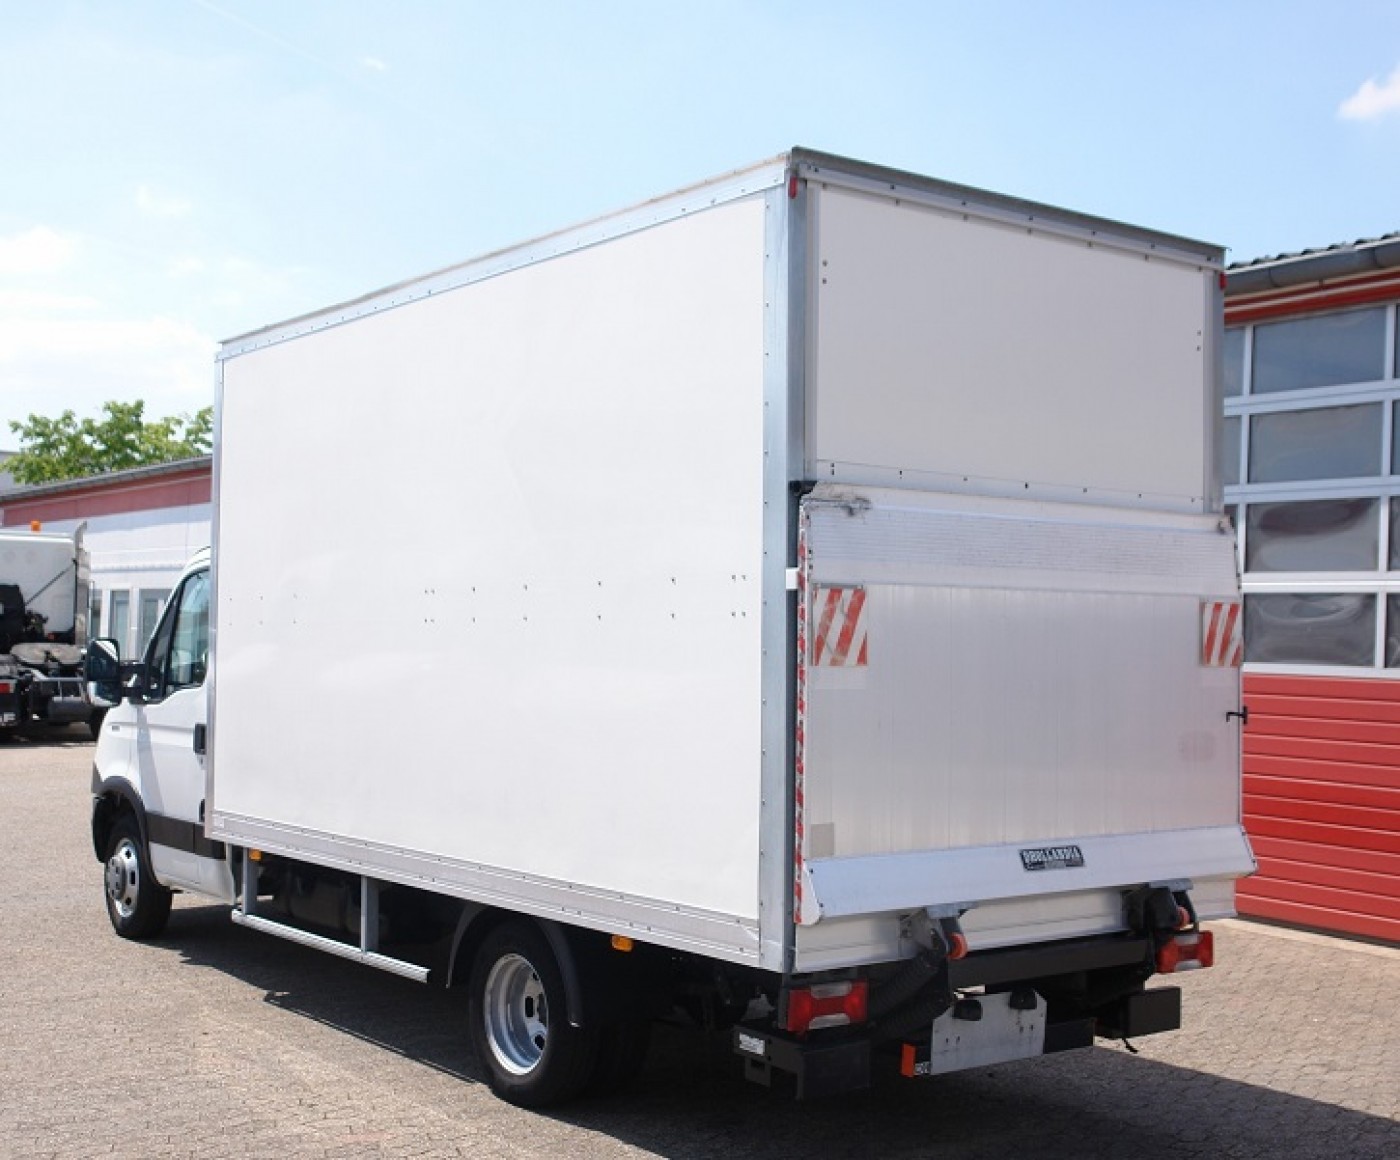 Iveco Daily 35C13 Koffer air condition sidedoor tail lift Dhollandia EURO5 TÜV!